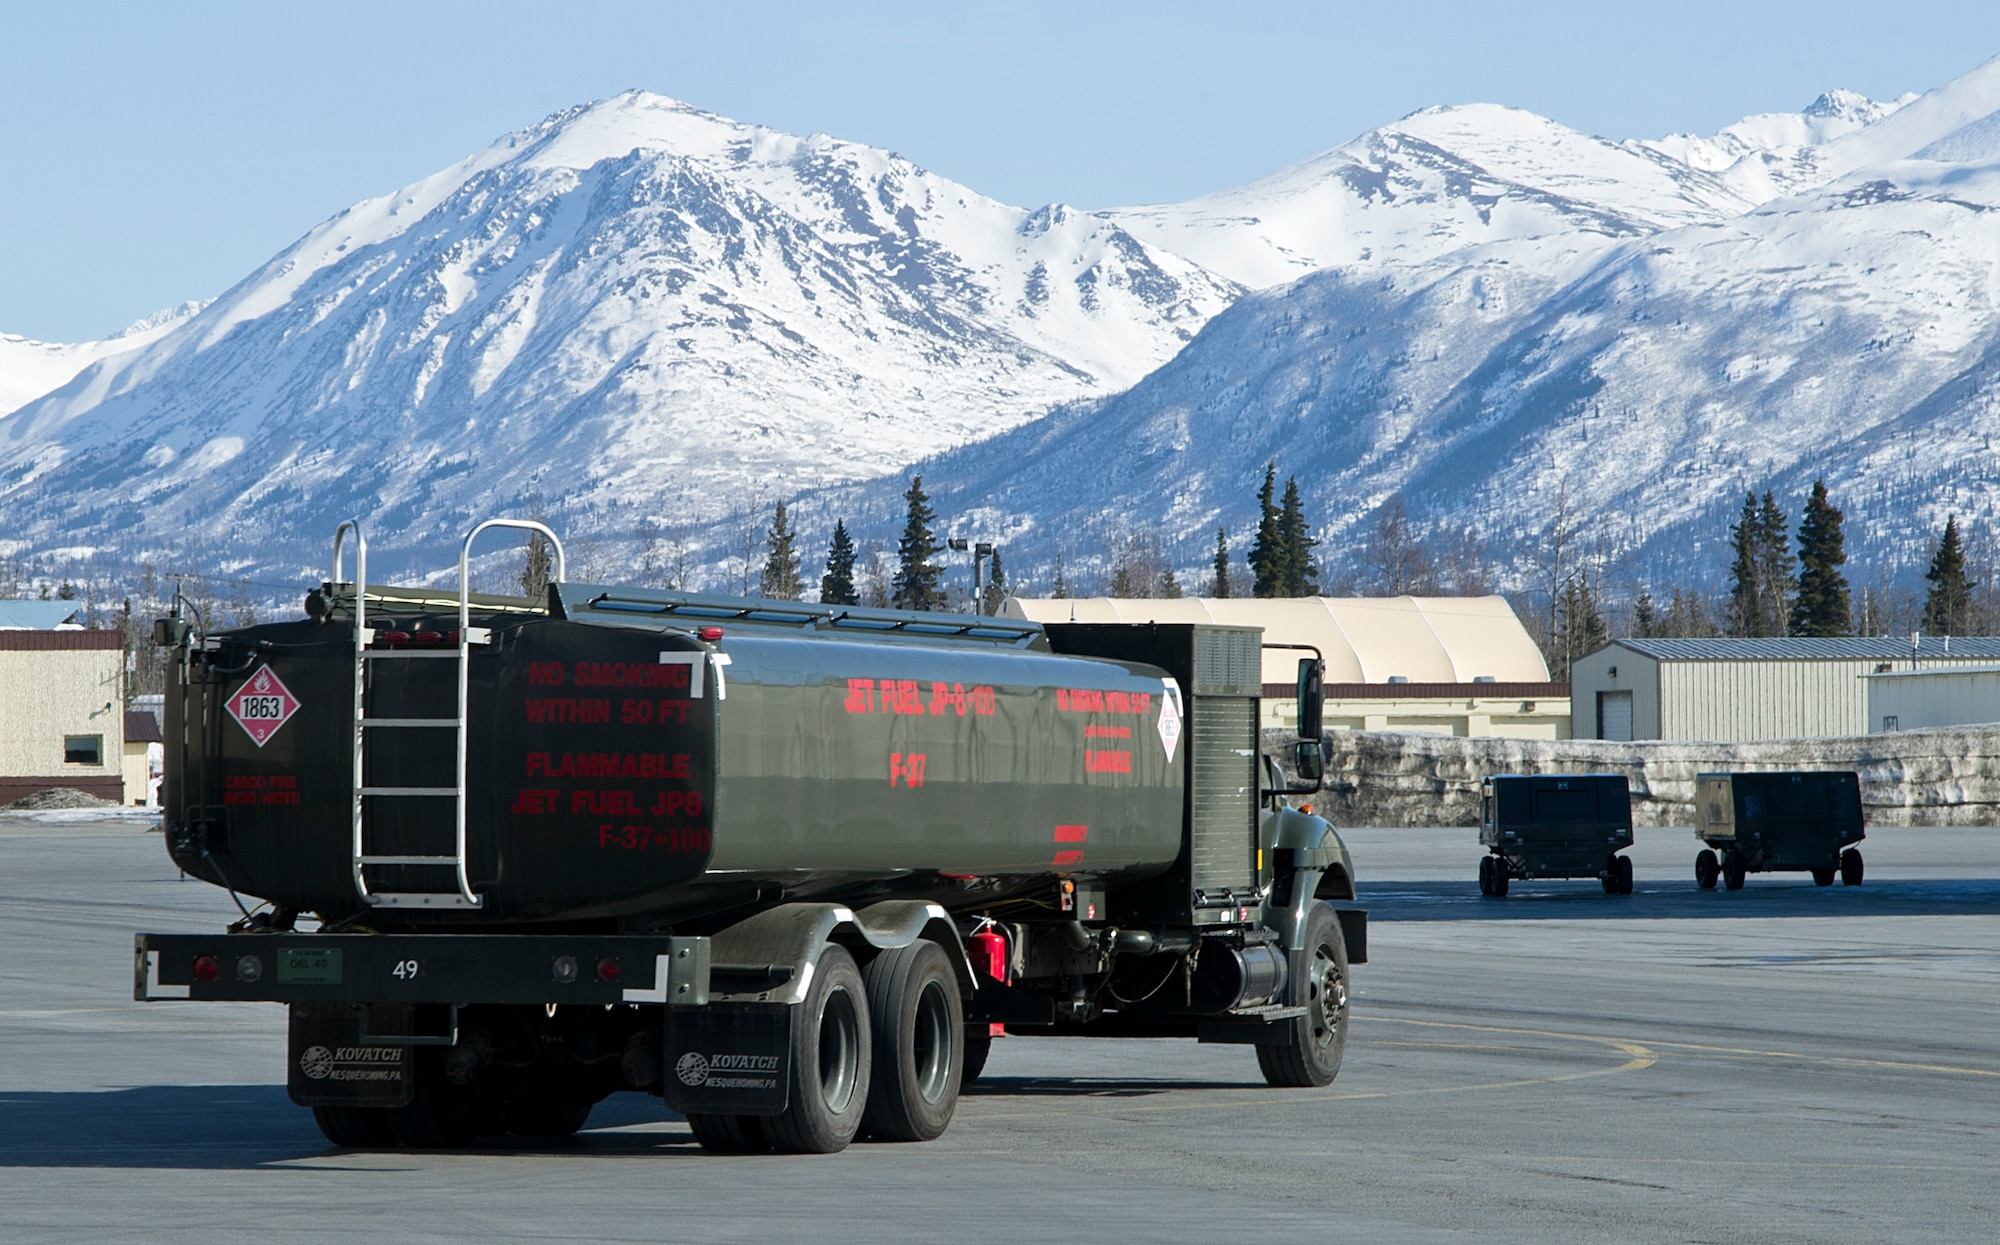 A R-11 fuel truck drives away after refueling an F-22 Raptor fighter on Joint Base Elmendorf-Richardson April 3, 2012. The R-11 fuel trucks can hold up to 6,000 gallons of fuel. (U.S. Air Force photo/Staff Sgt. Zachary Wolf)